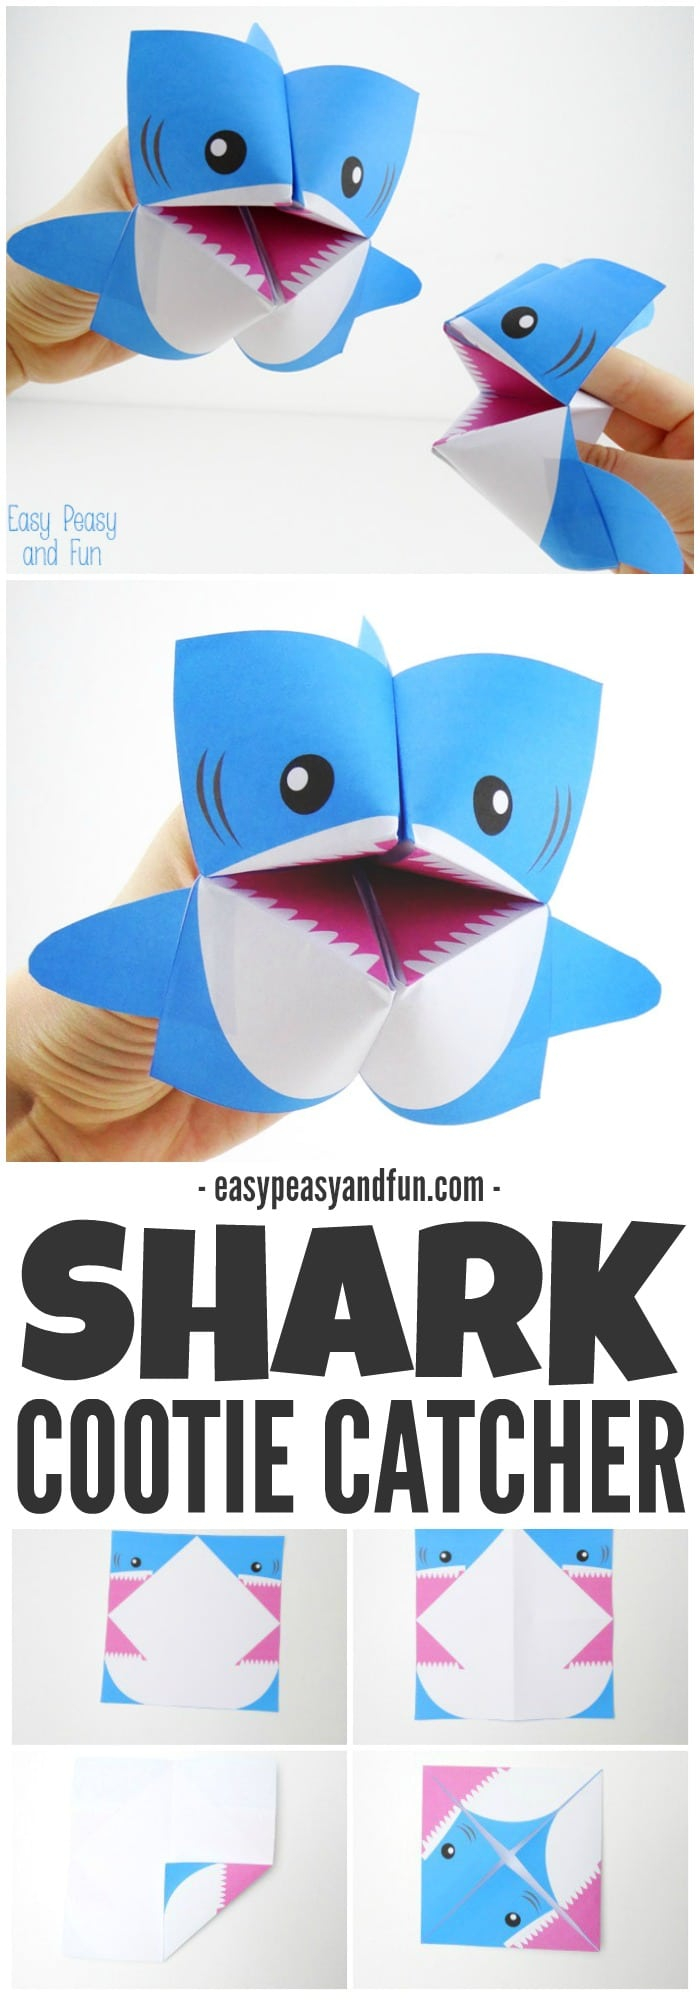 Origami For Kindergarteners Shark Cootie Catcher Origami For Kids Easy Peasy And Fun